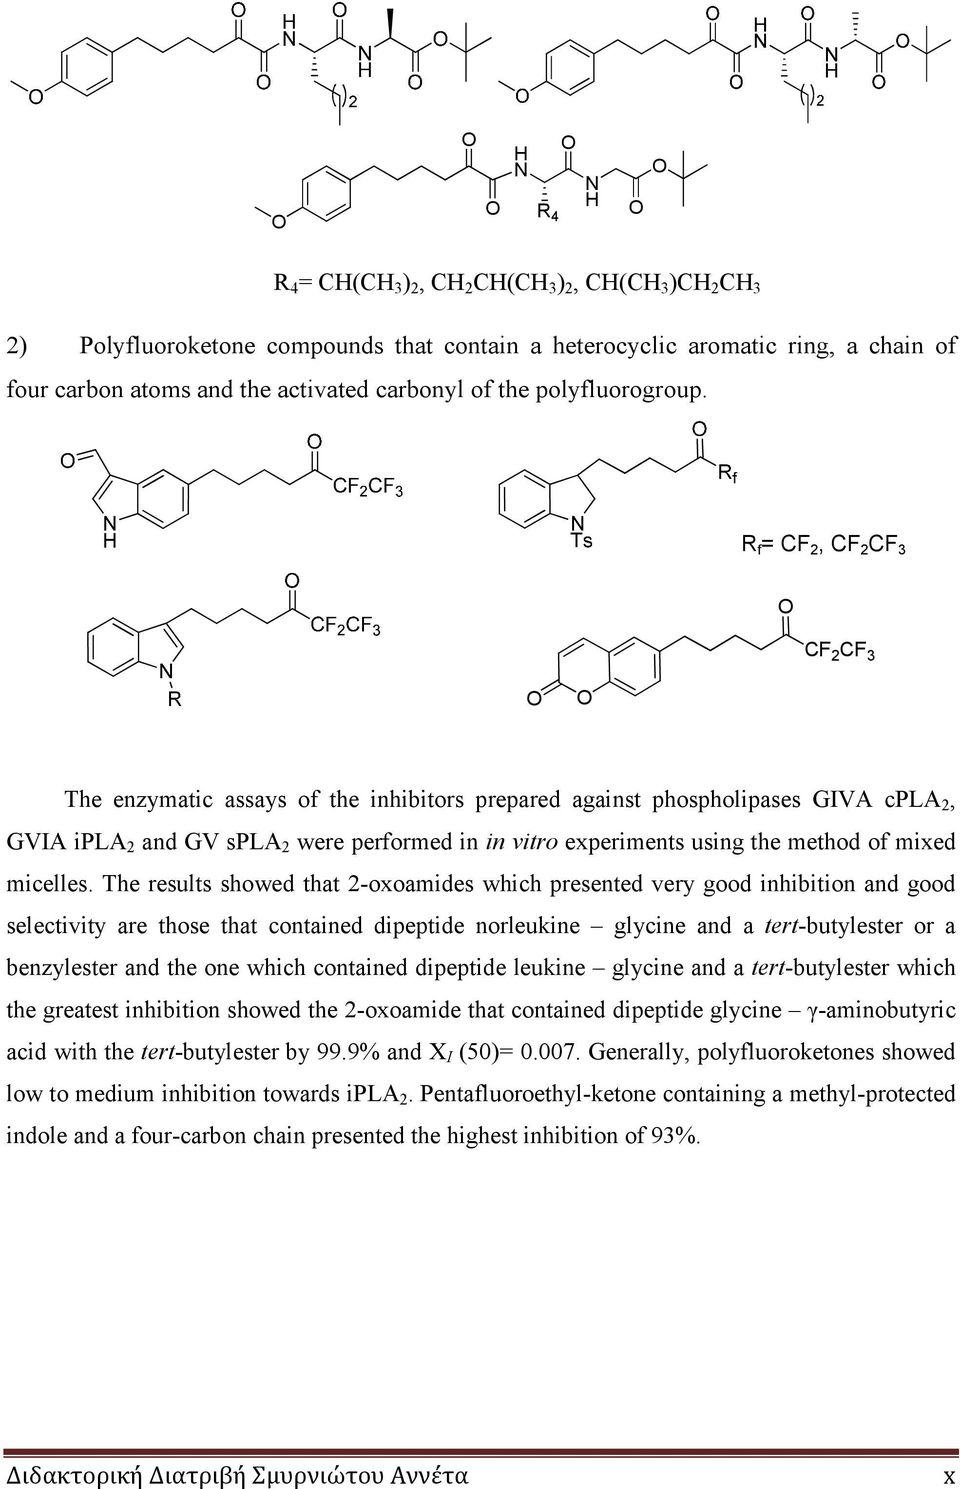 R f = CF 2, CF 2 CF 3 CF 2 CF 3 The enzymatic assays of the inhibitors prepared against phospholipases GIVA cpla 2, GVIA ipla 2 and GV spla 2 were performed in in vitro experiments using the method